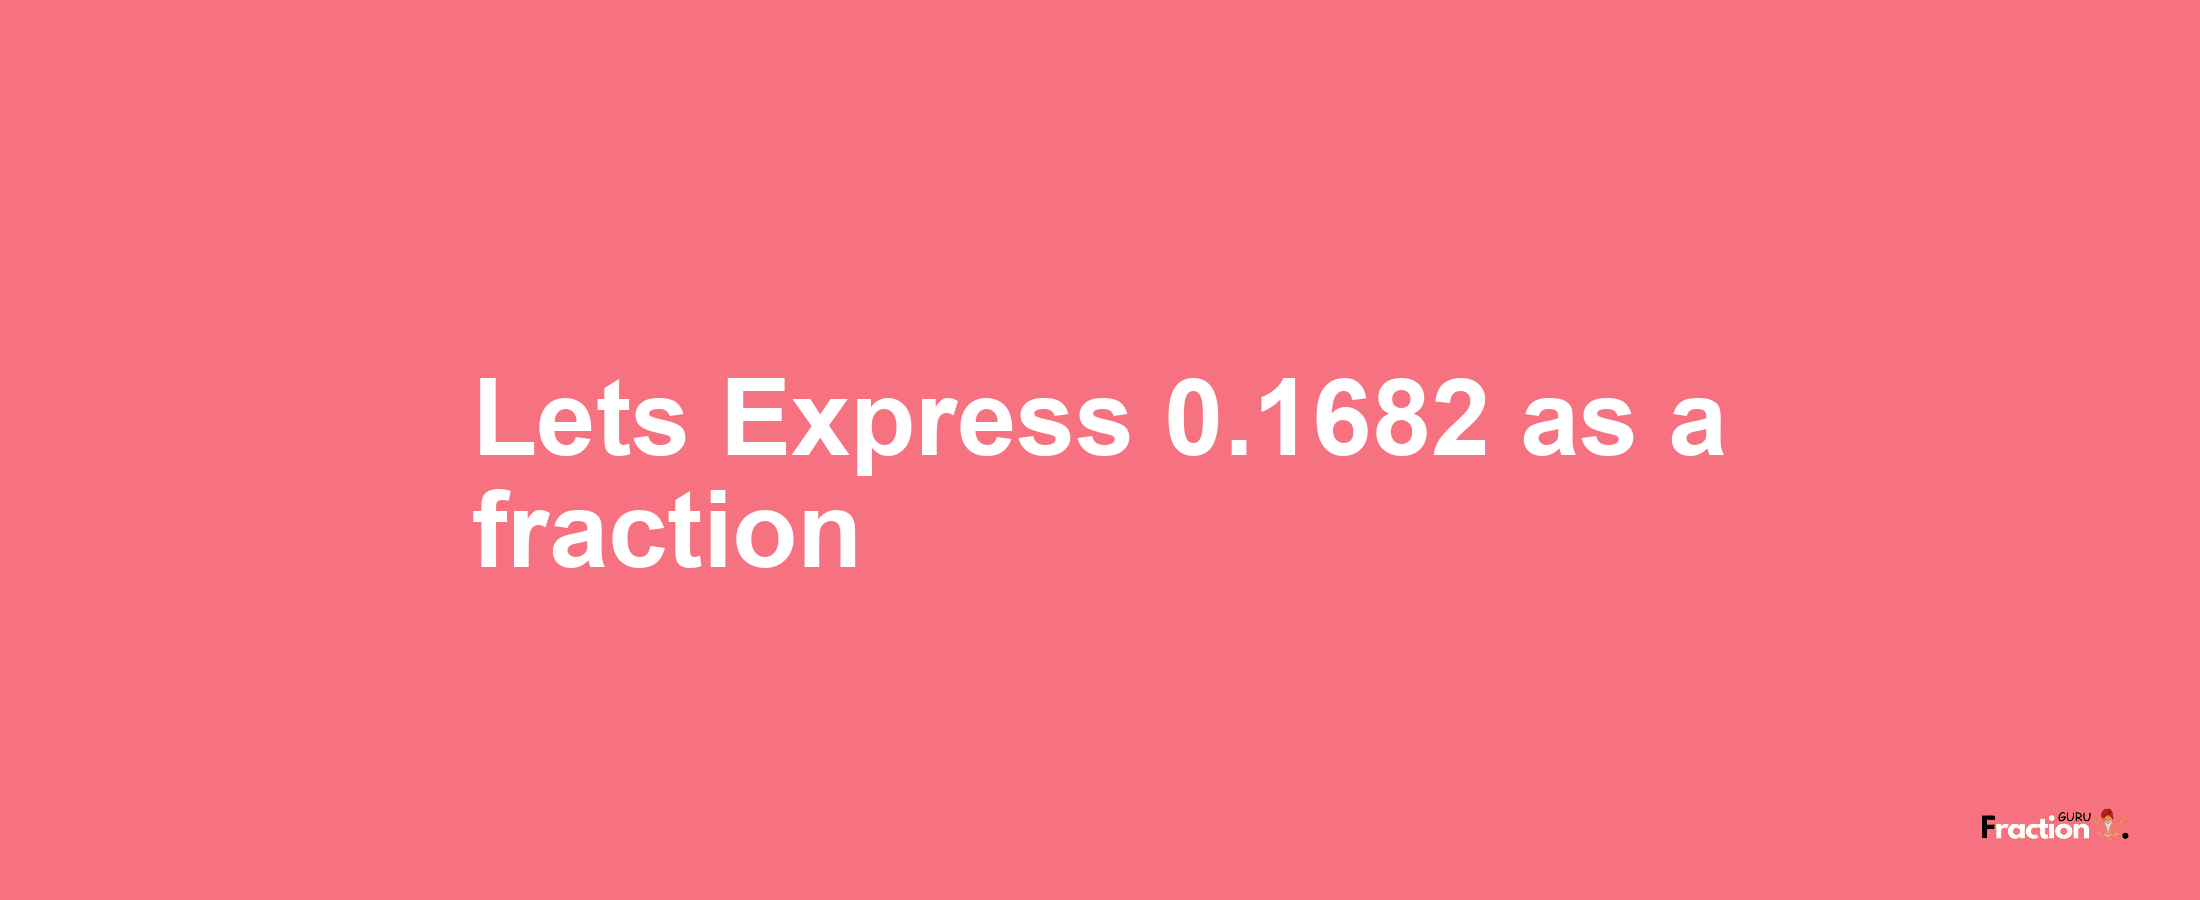 Lets Express 0.1682 as afraction